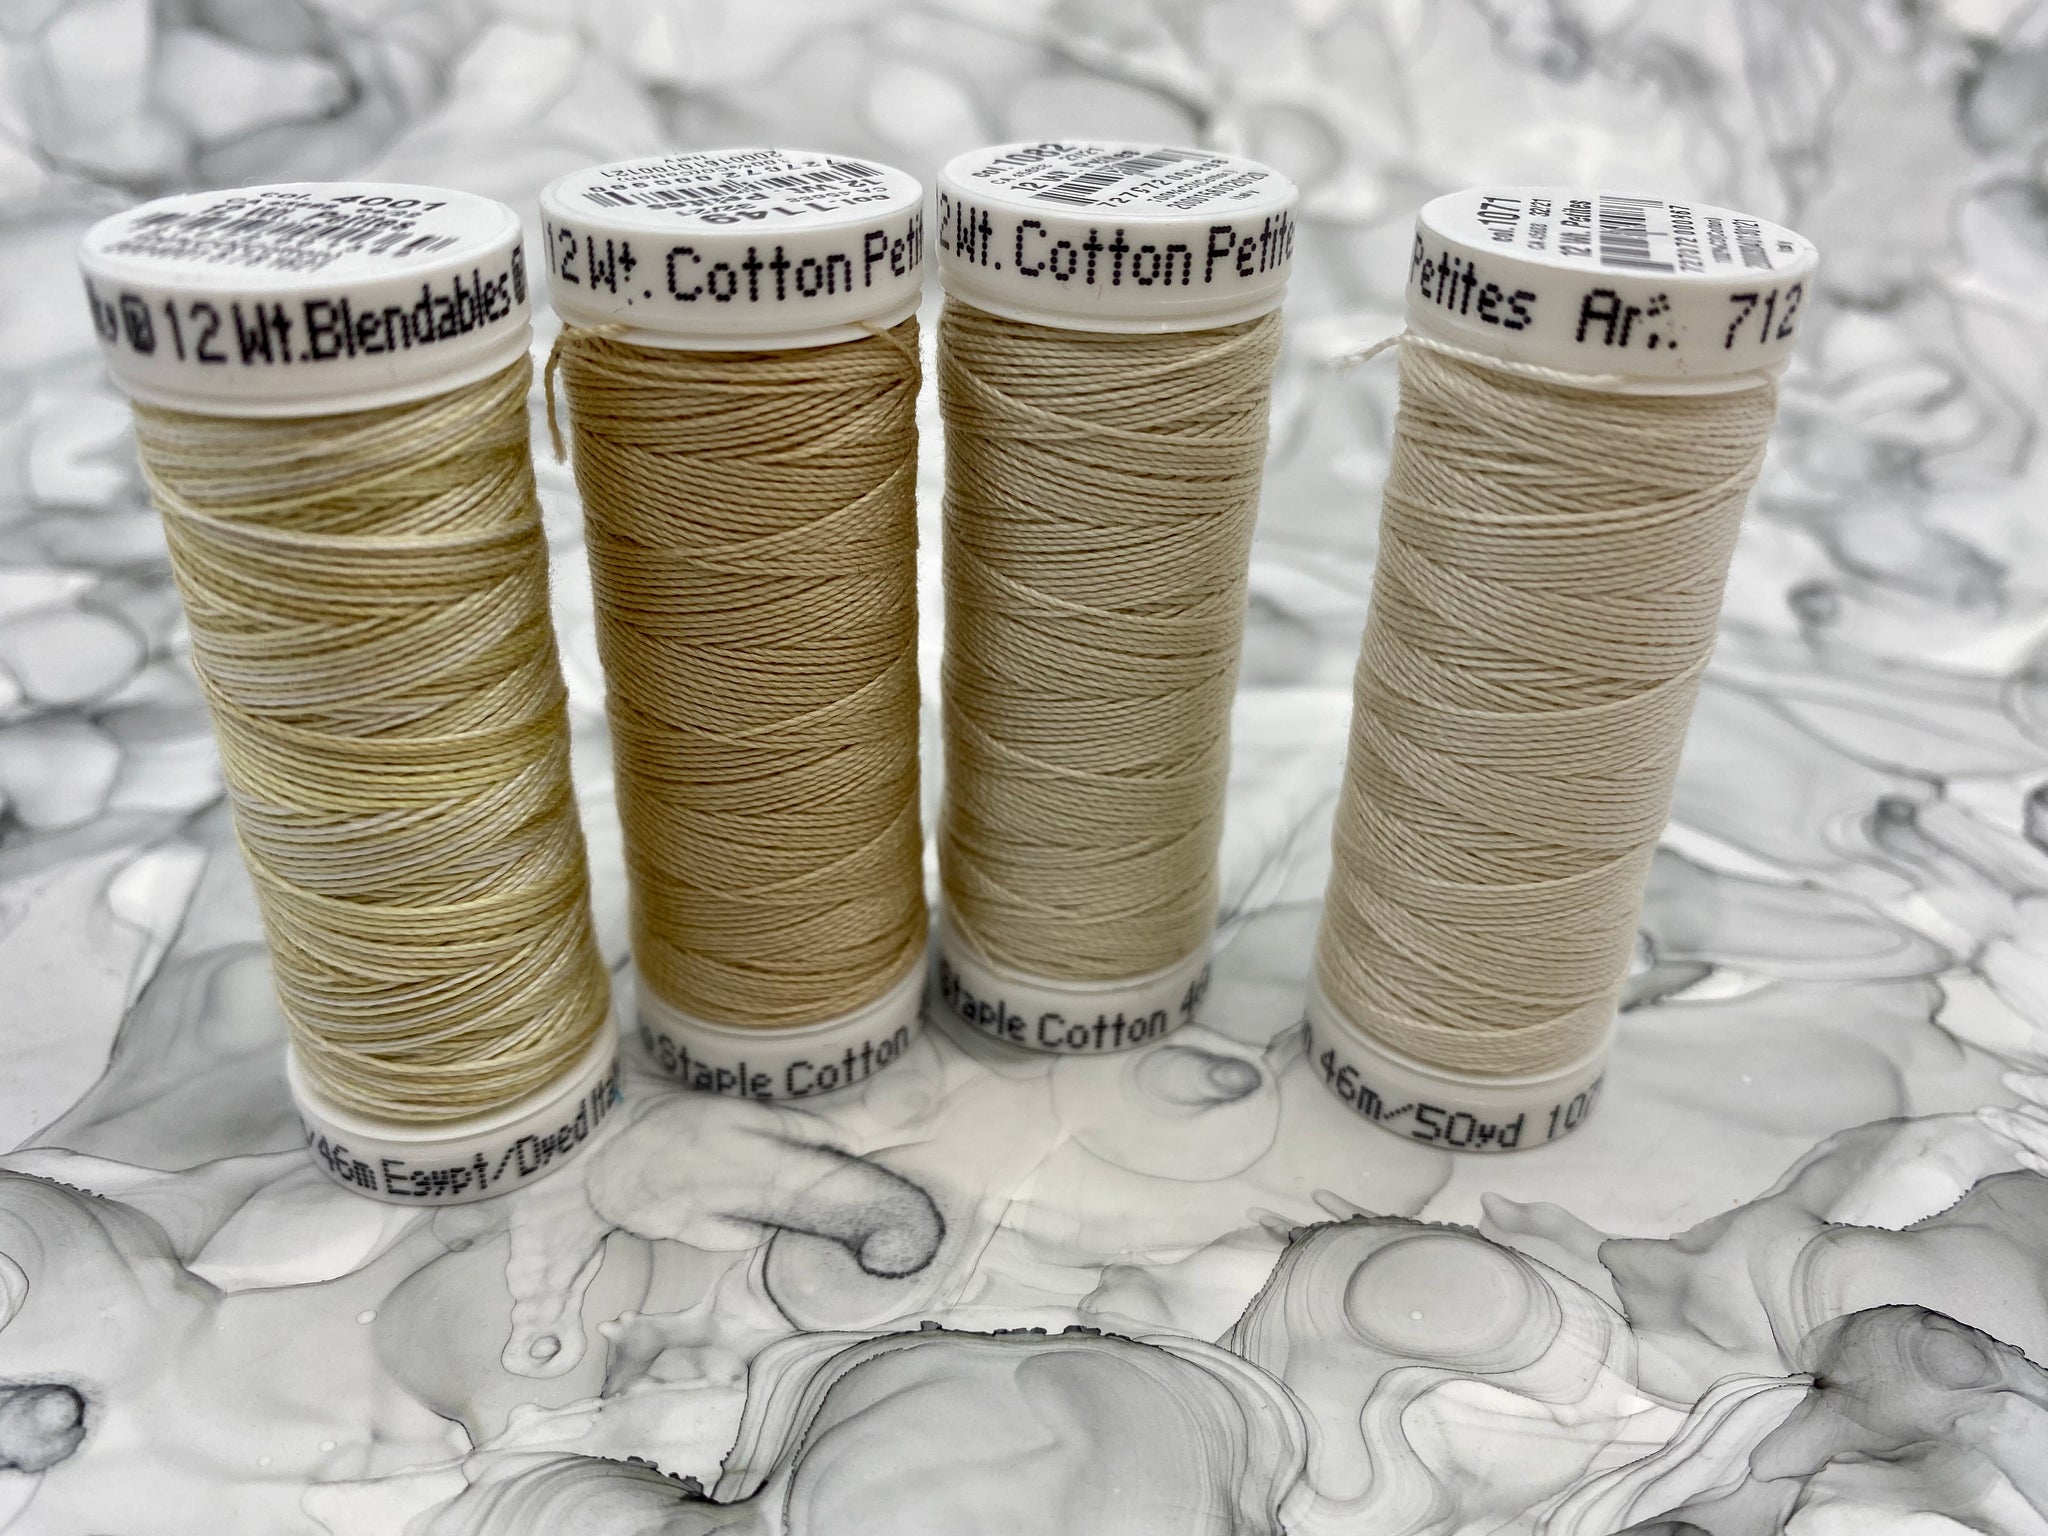 Off-White Thread Set of 4 Sulky Solid Cotton Thread Spools - 12wt